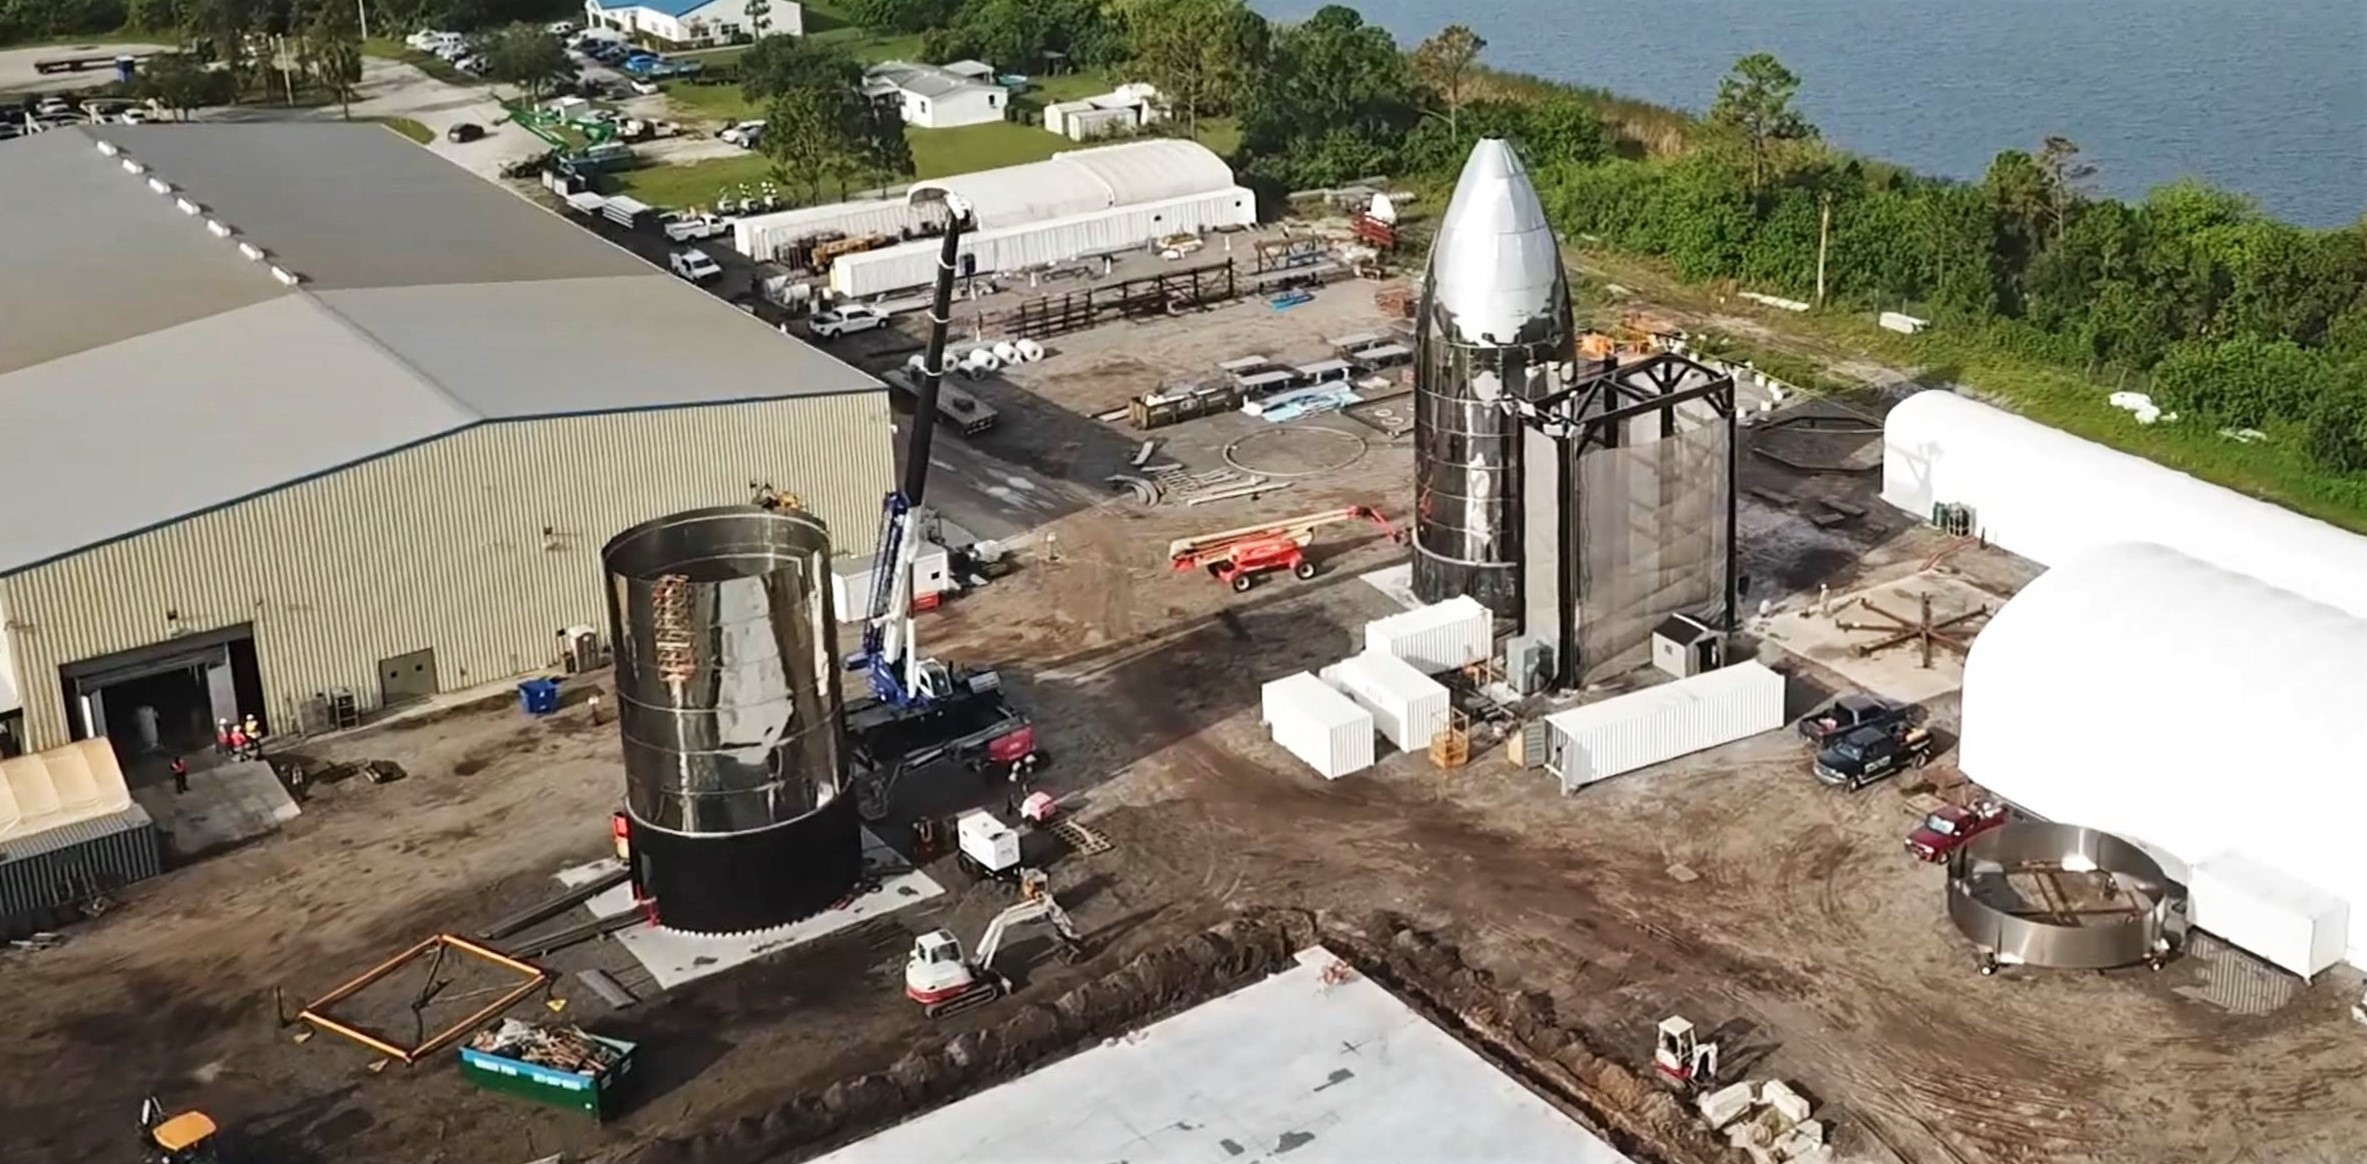 SpaceX scrapped the Florida Starship MK2 sample